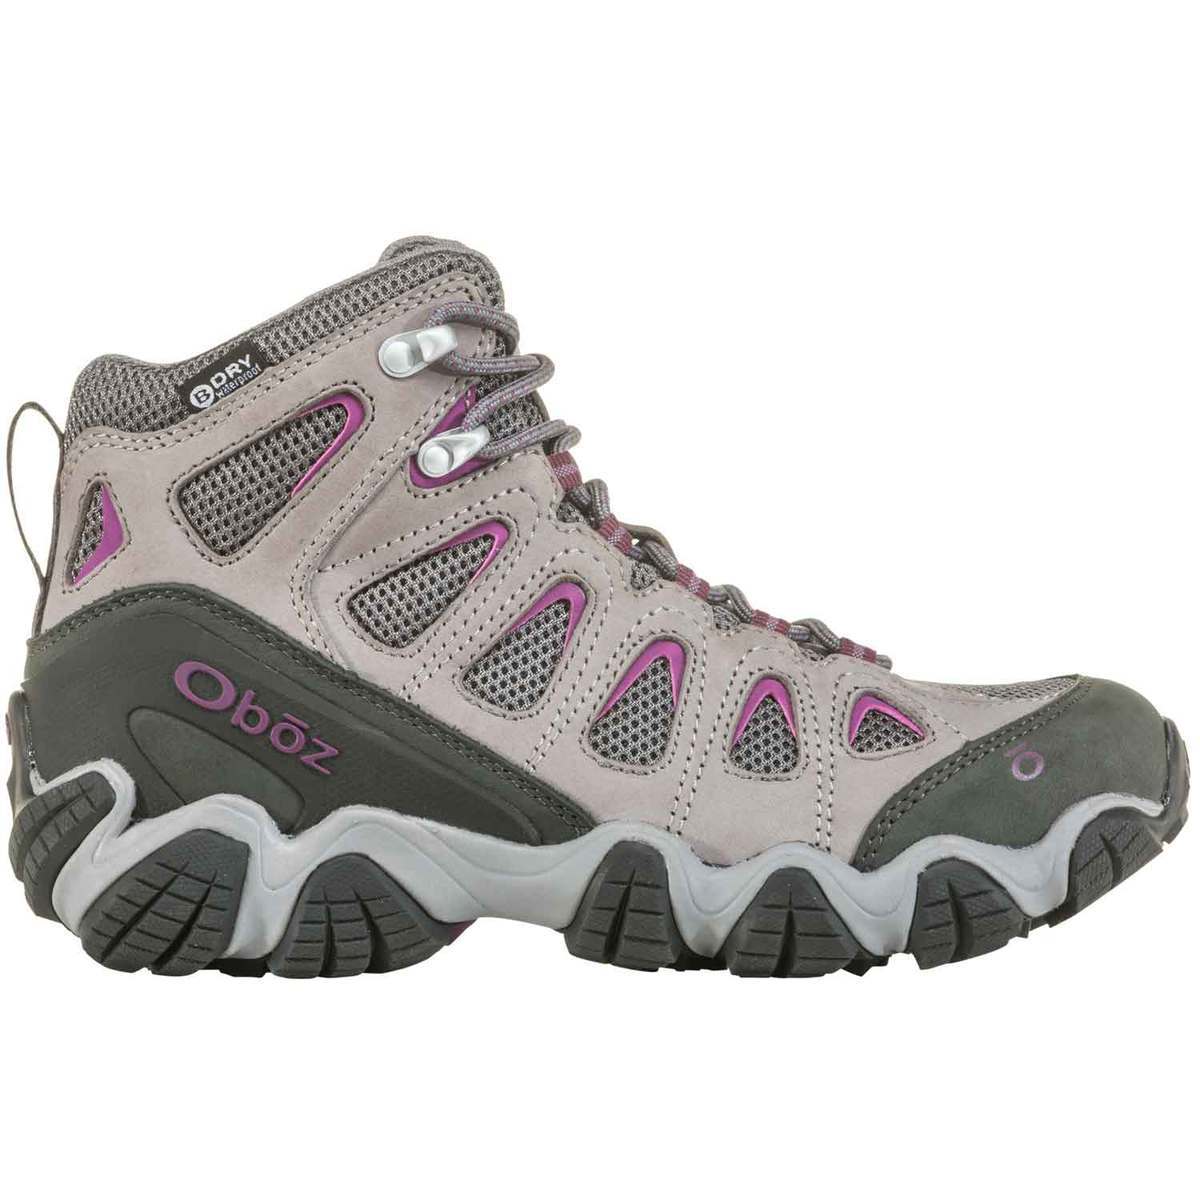 Oboz Women's Sawtooth II Waterproof Mid Hiking Boots - Pewter - Size 6 ...